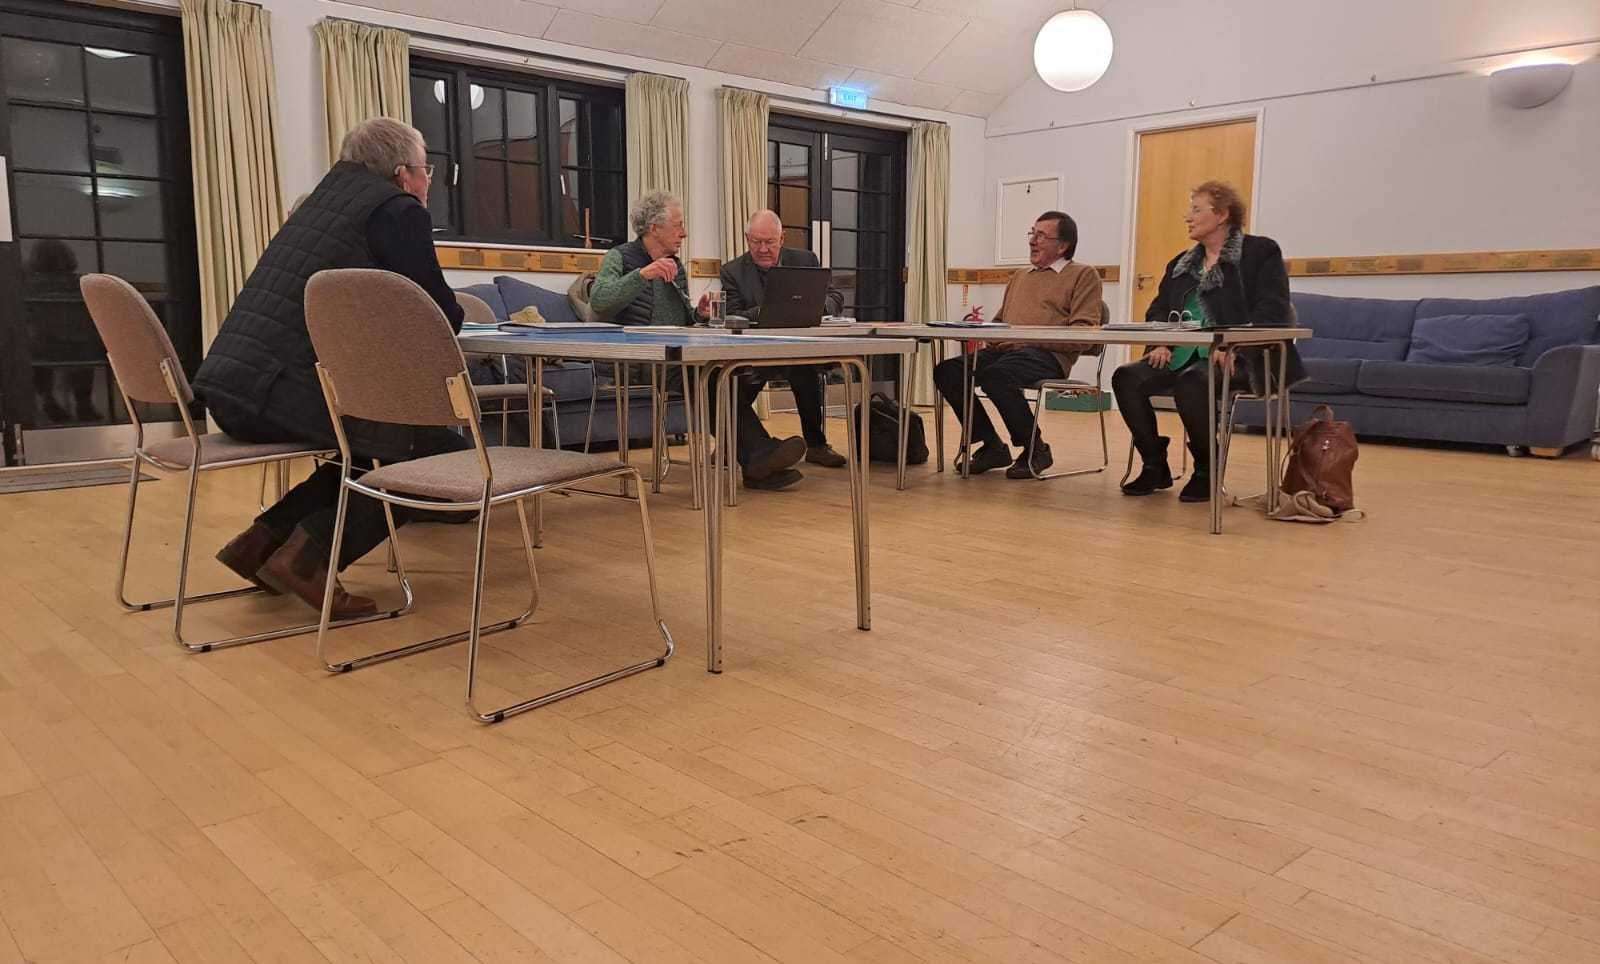 Brandeston Parish Council met yesterday (January 8) to discuss the planning application for The Queen, which would change the use of the venue to a home, to which it unanimously objected. Picture: Ross Waldron